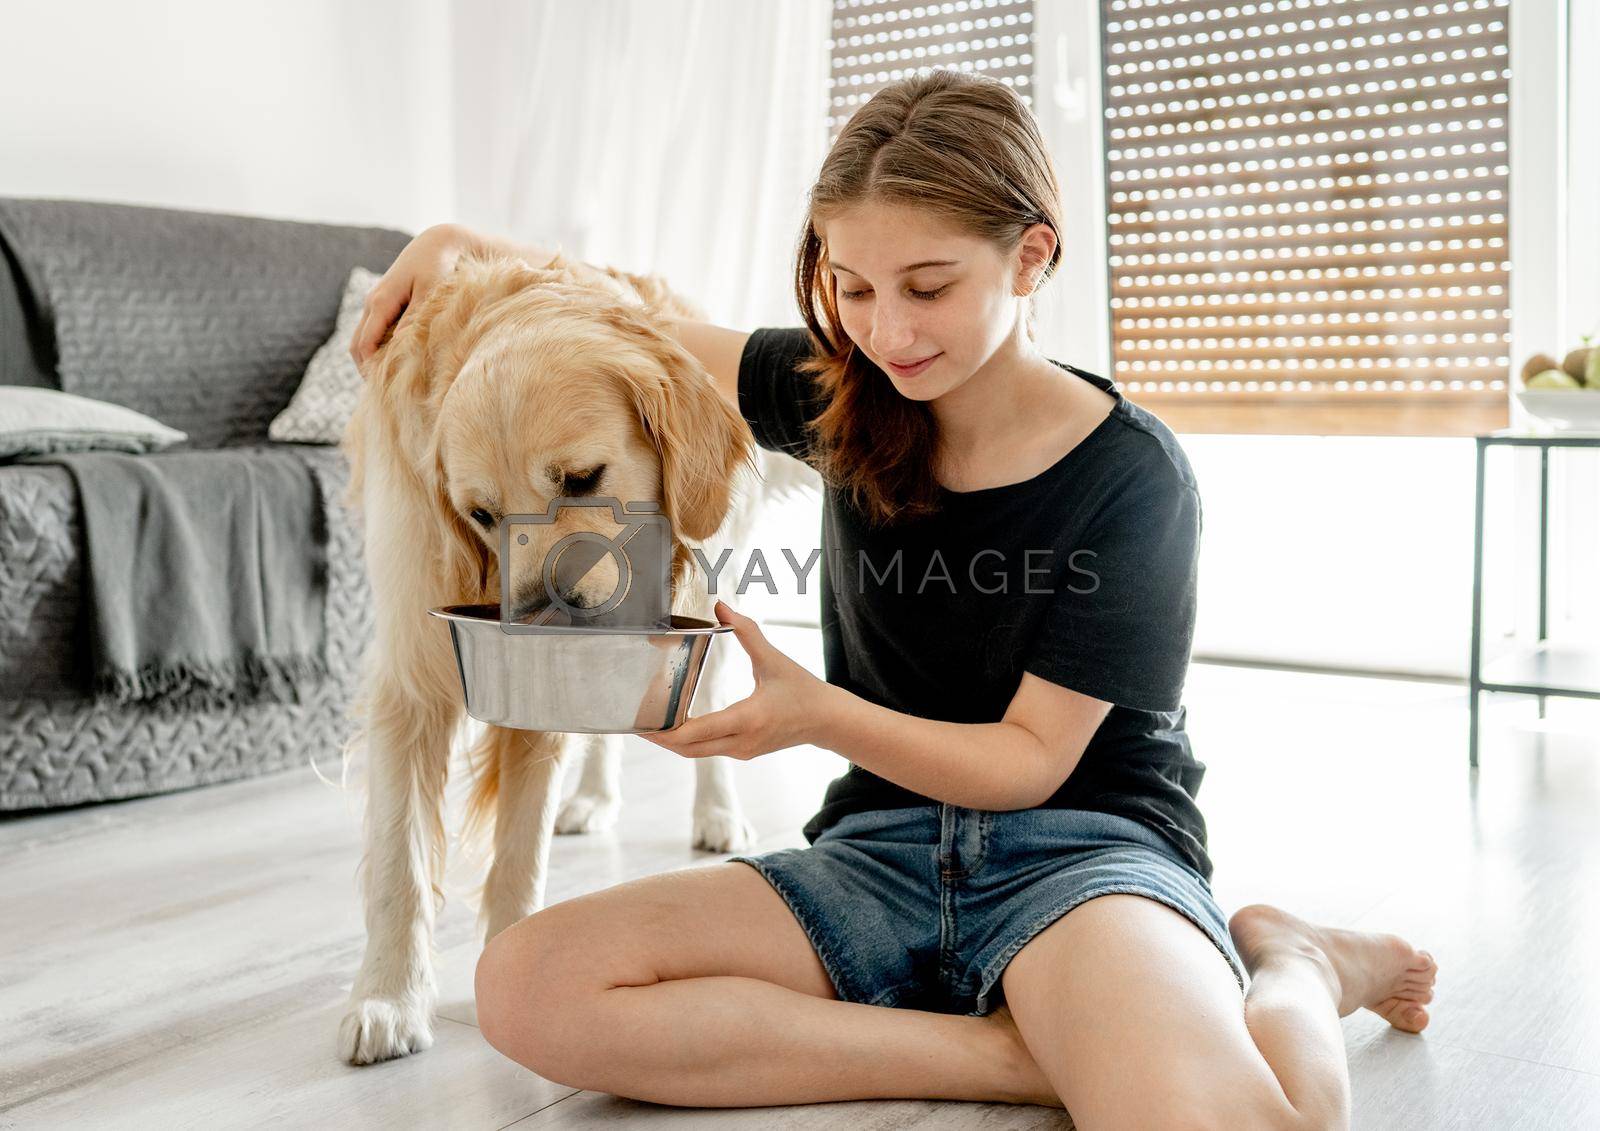 Royalty free image of Girl with golden retriever dog by tan4ikk1